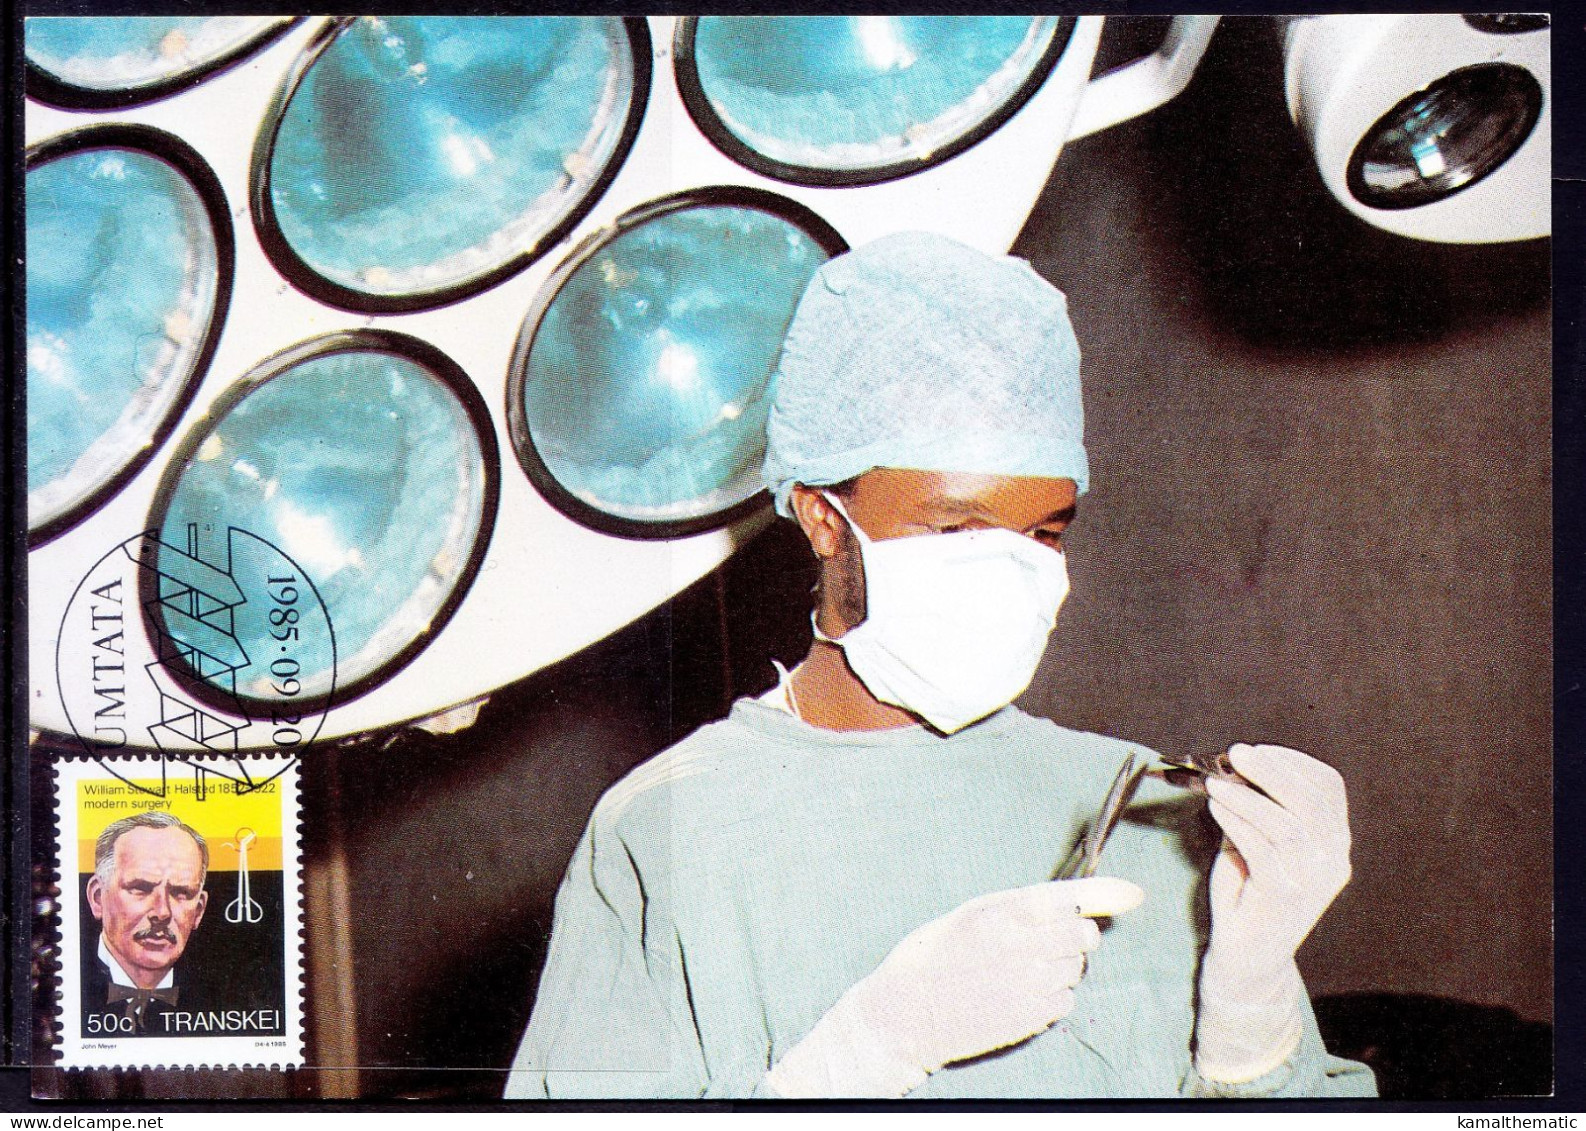 Surgeon William S Halsted, Aseptic Technique, Modern Surgery, Transkei 1985 Maxi Card - Médecine